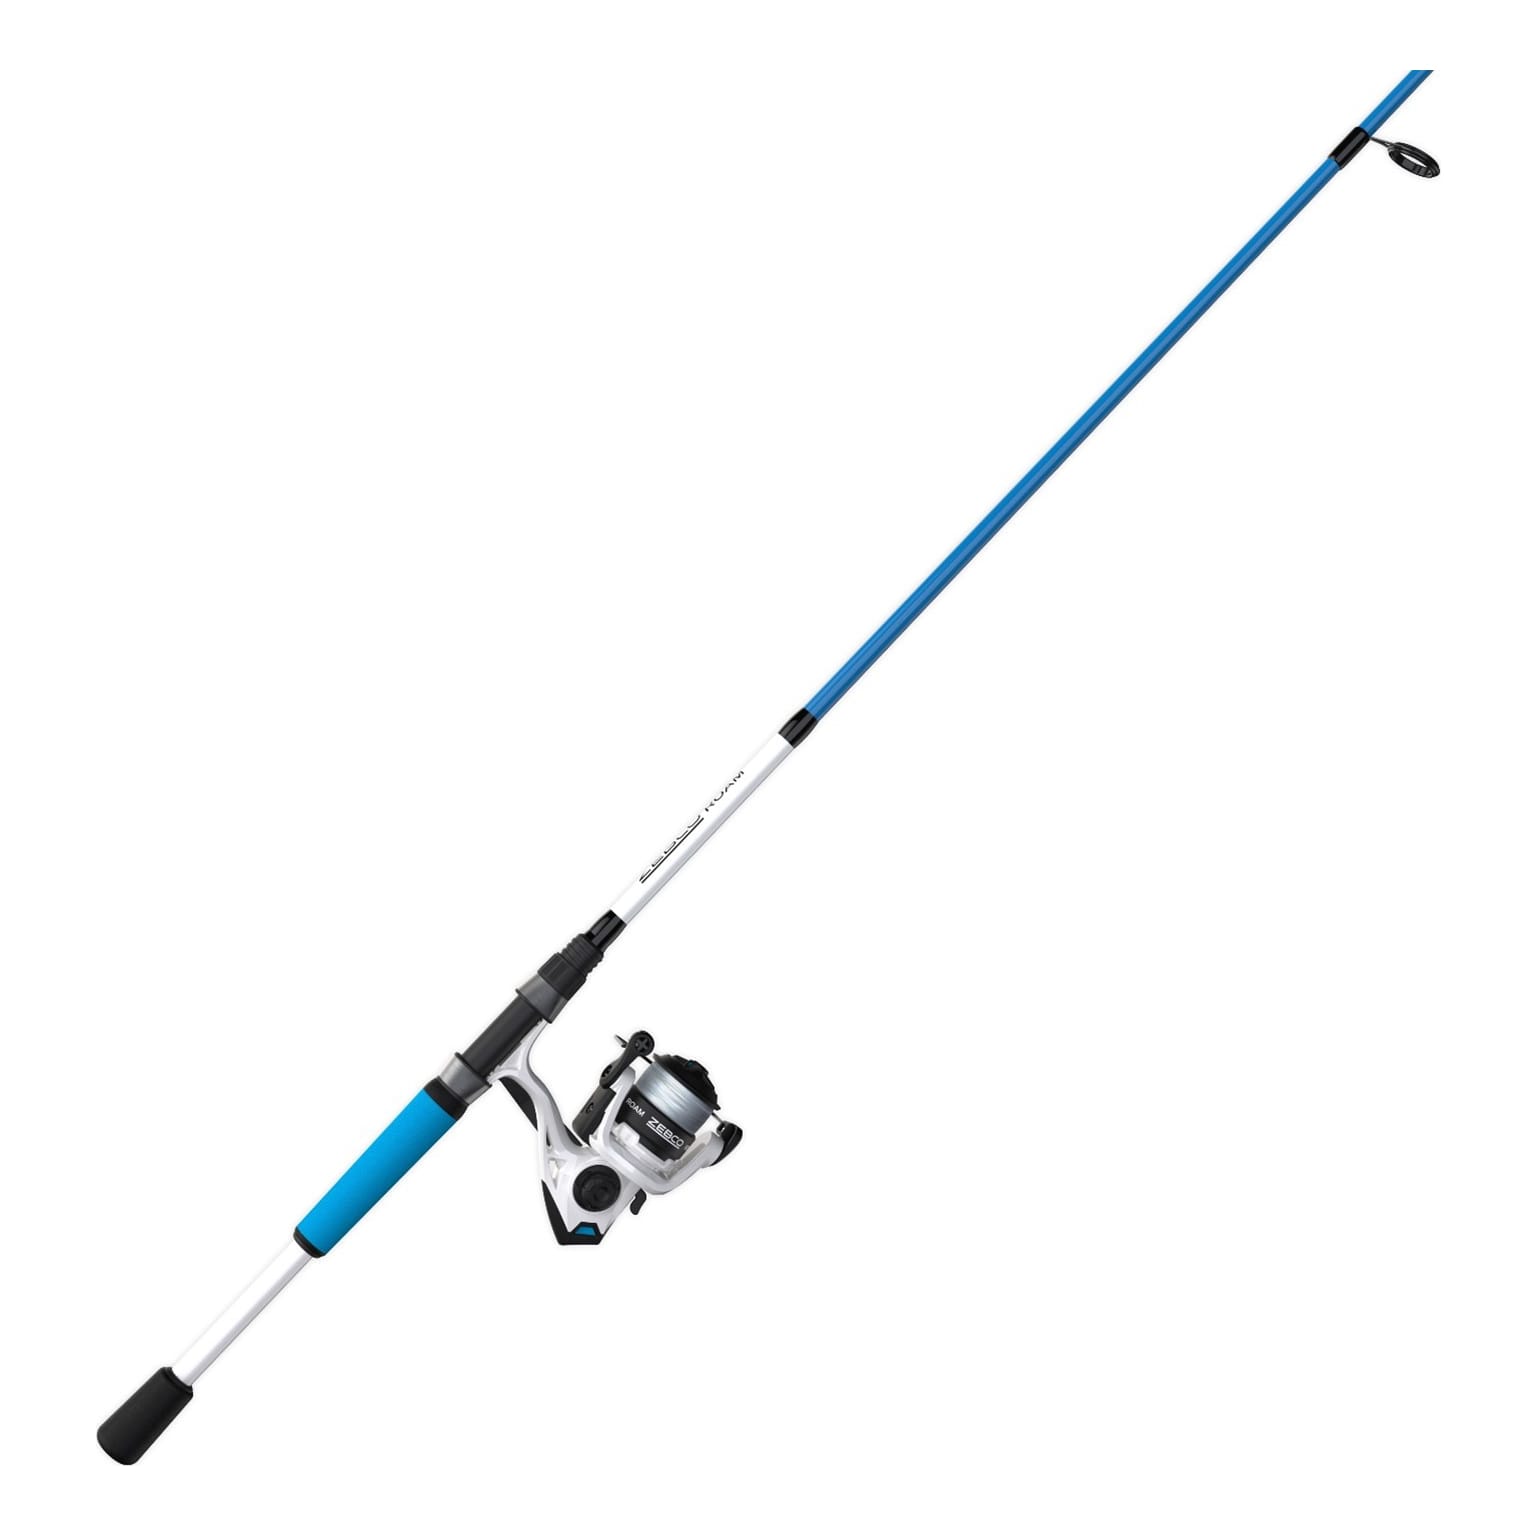 Shakespeare Lake/Pond Rod and Reel Combo, 5-Feet 6-Inch, Spincasting Combos  -  Canada